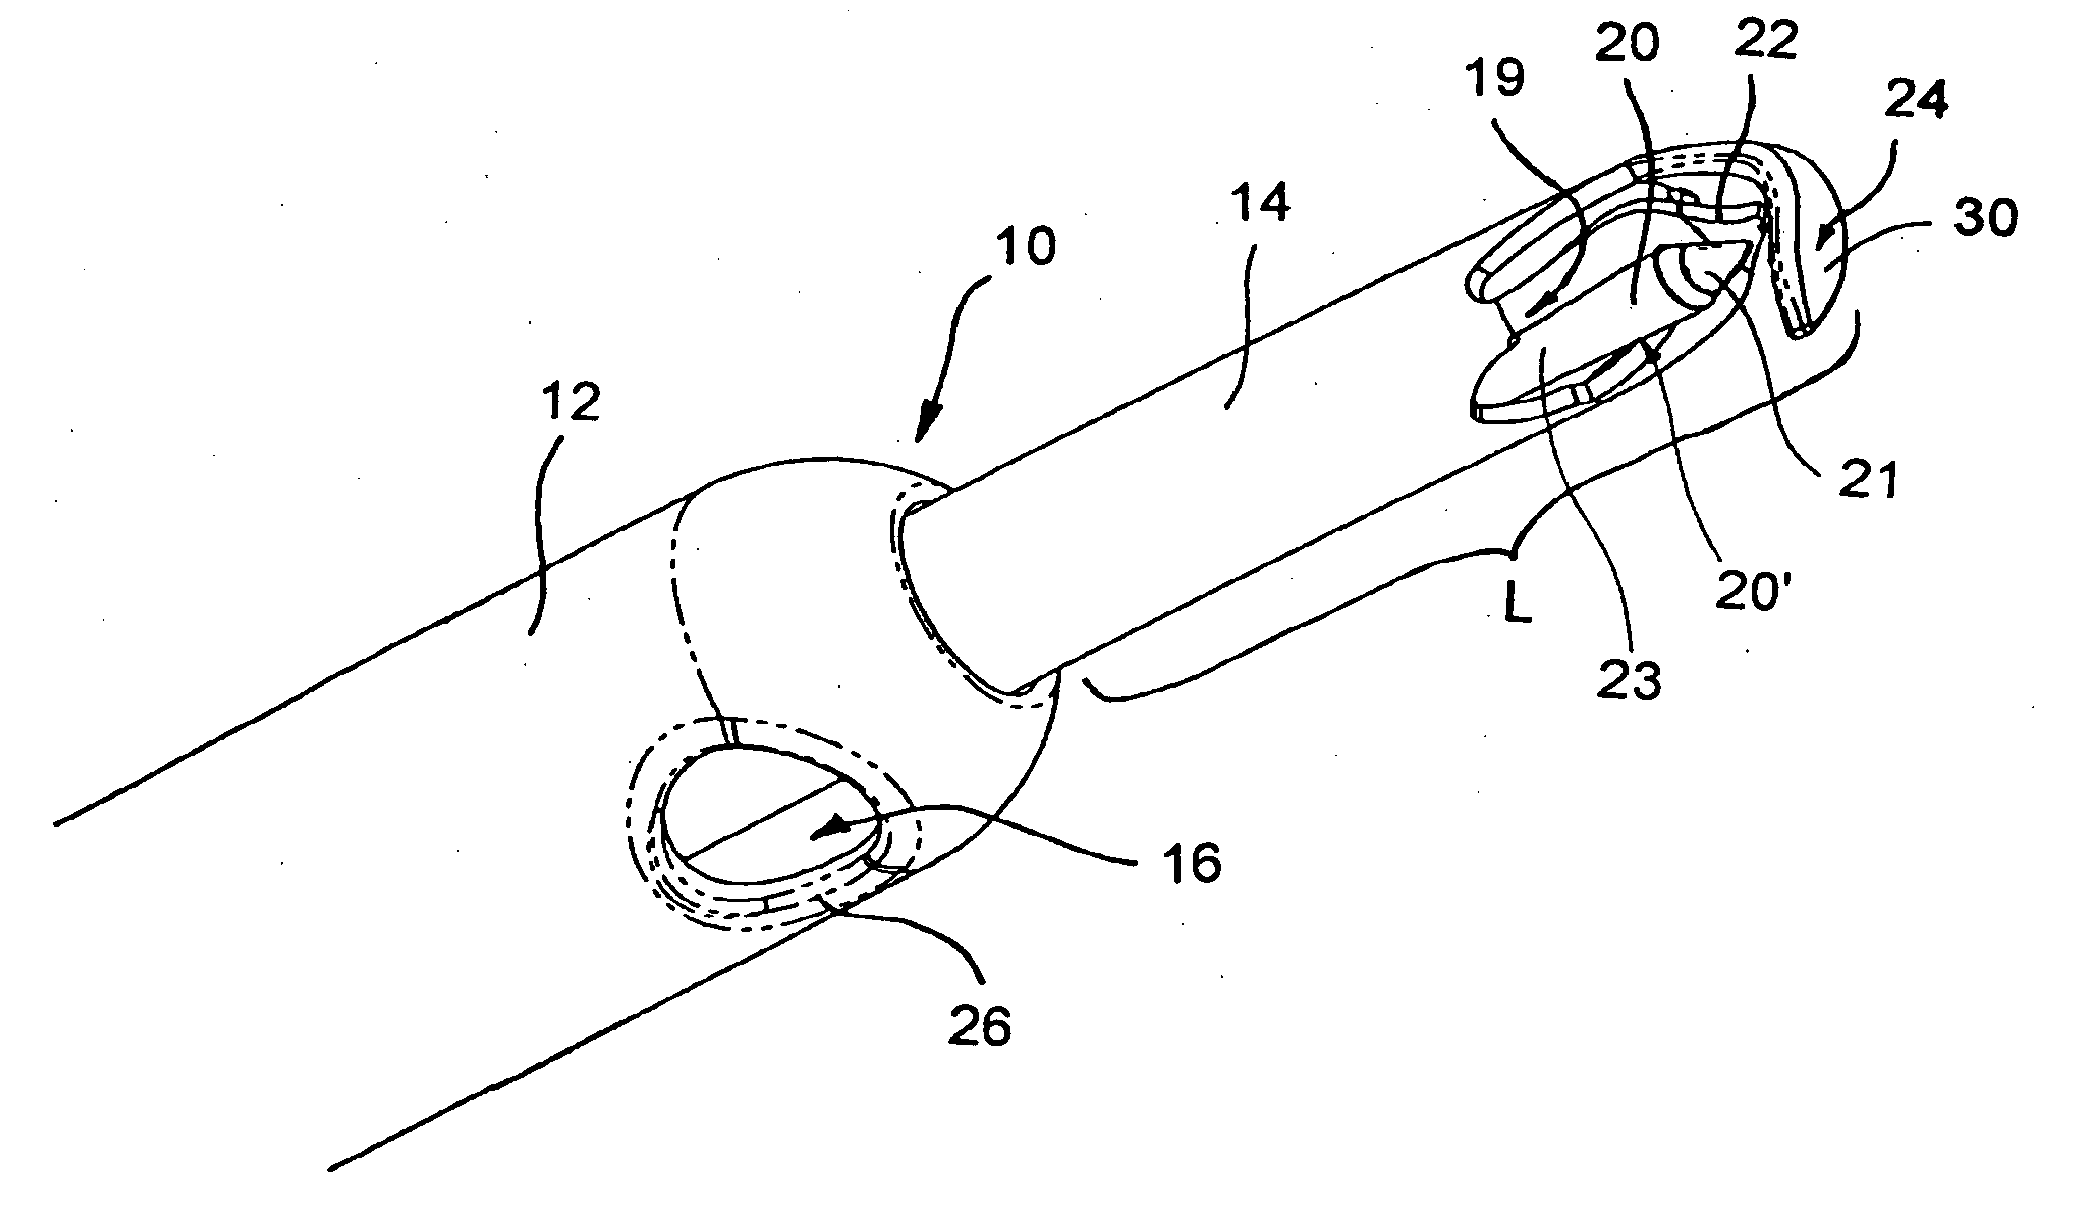 Devices and Methods Useable for Treatment of Glaucoma and Other Surgical Prcedures